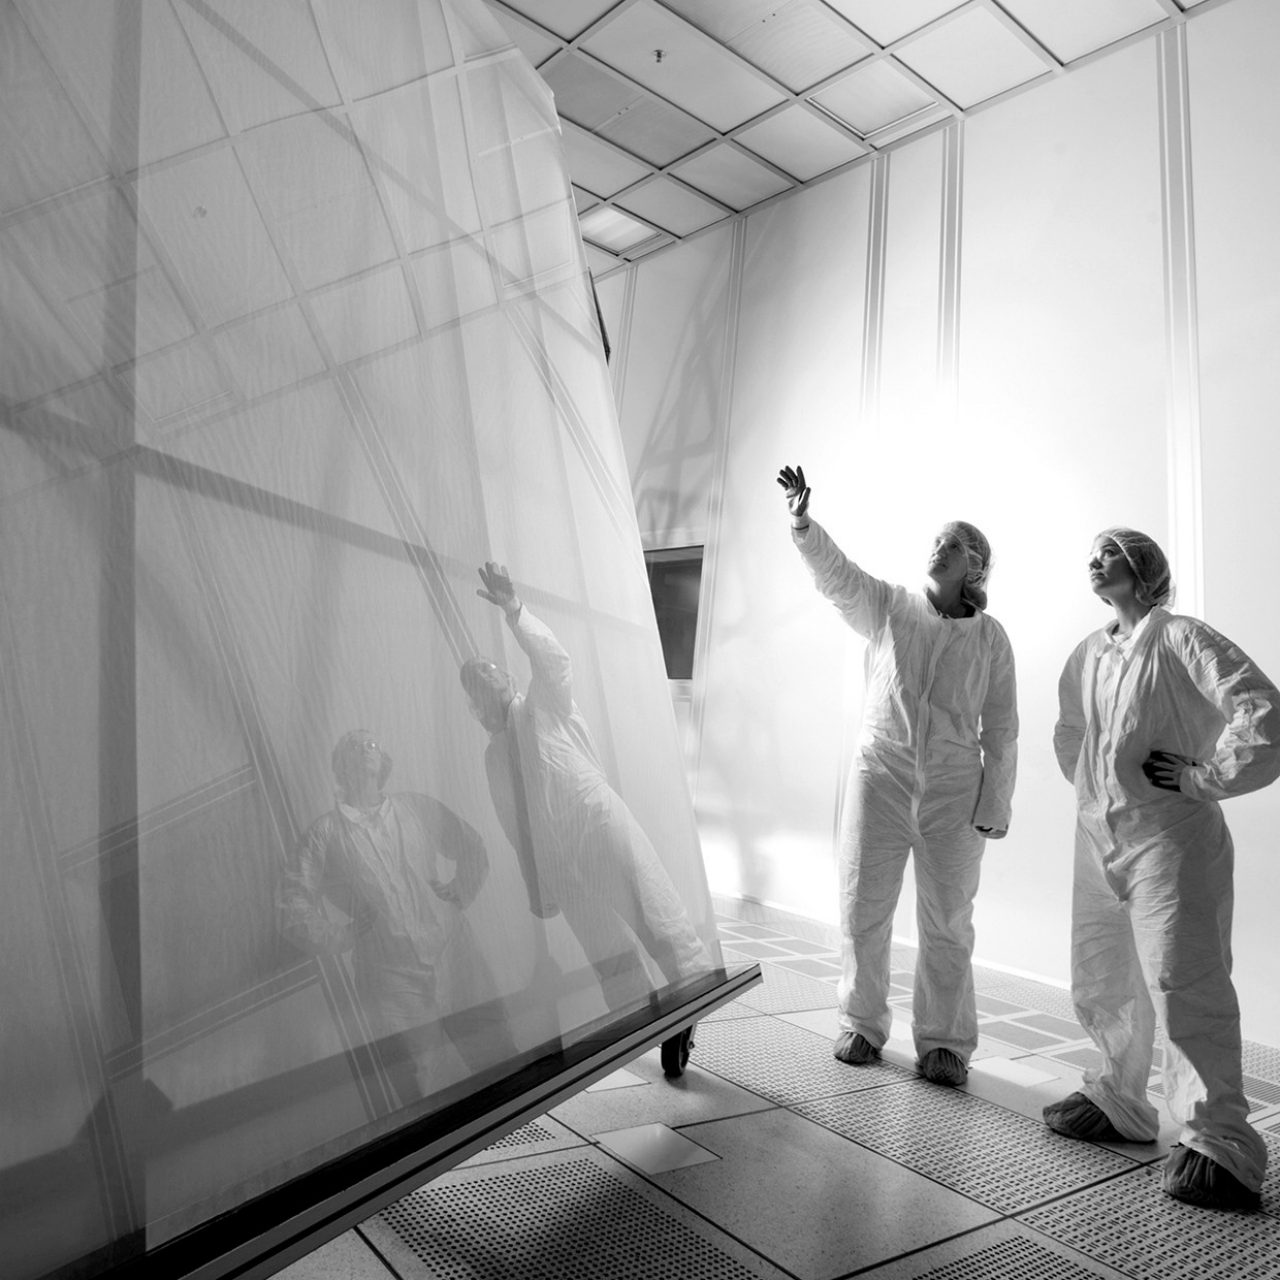 large sheet of glass and two scientists